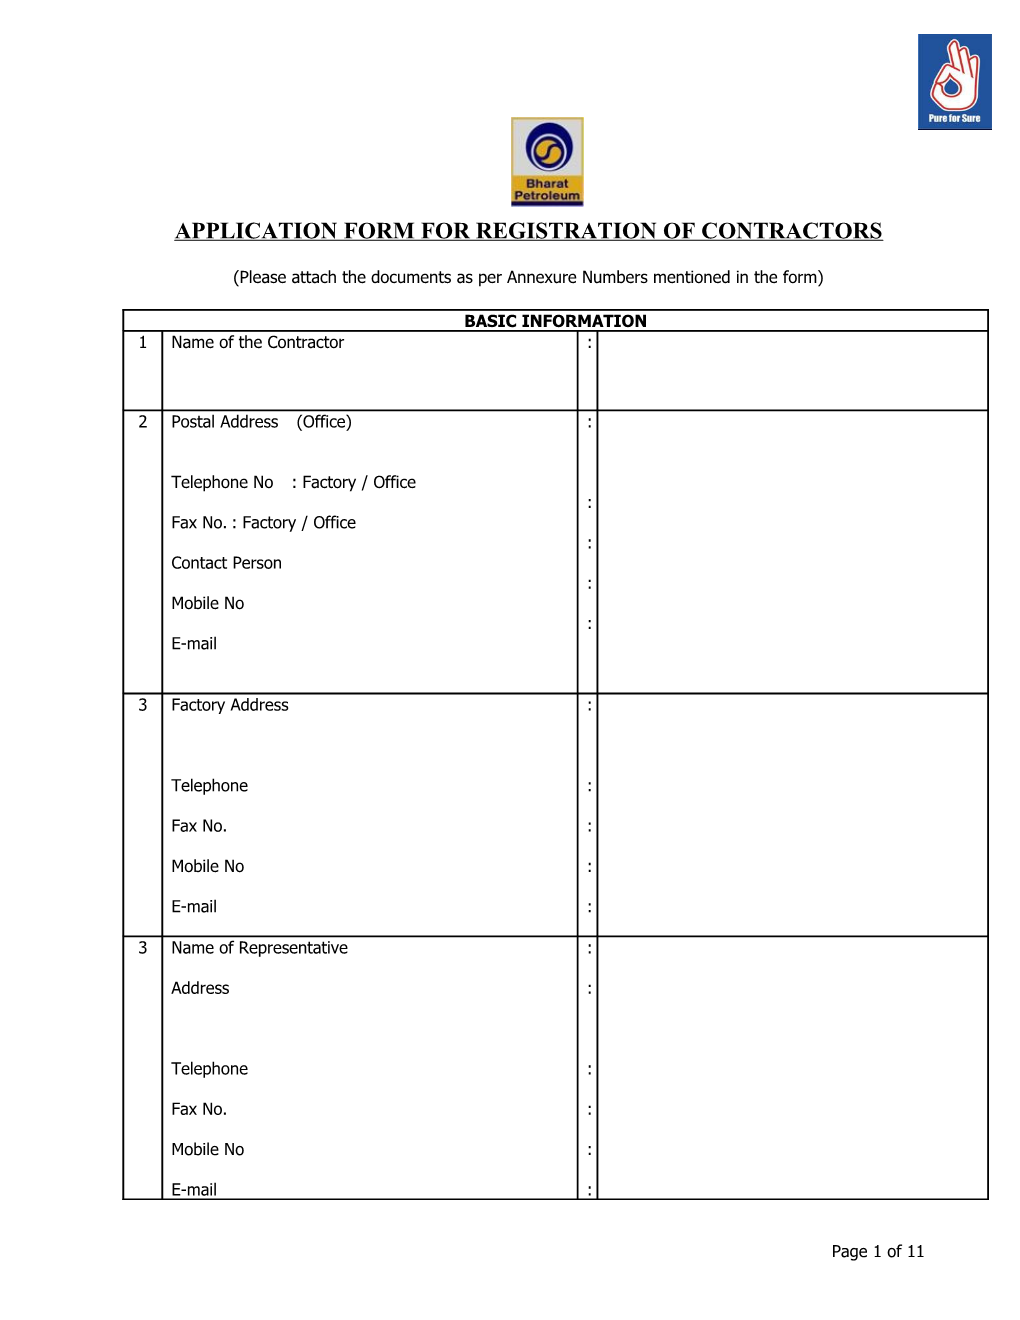 Application Form for Registration of Contractors